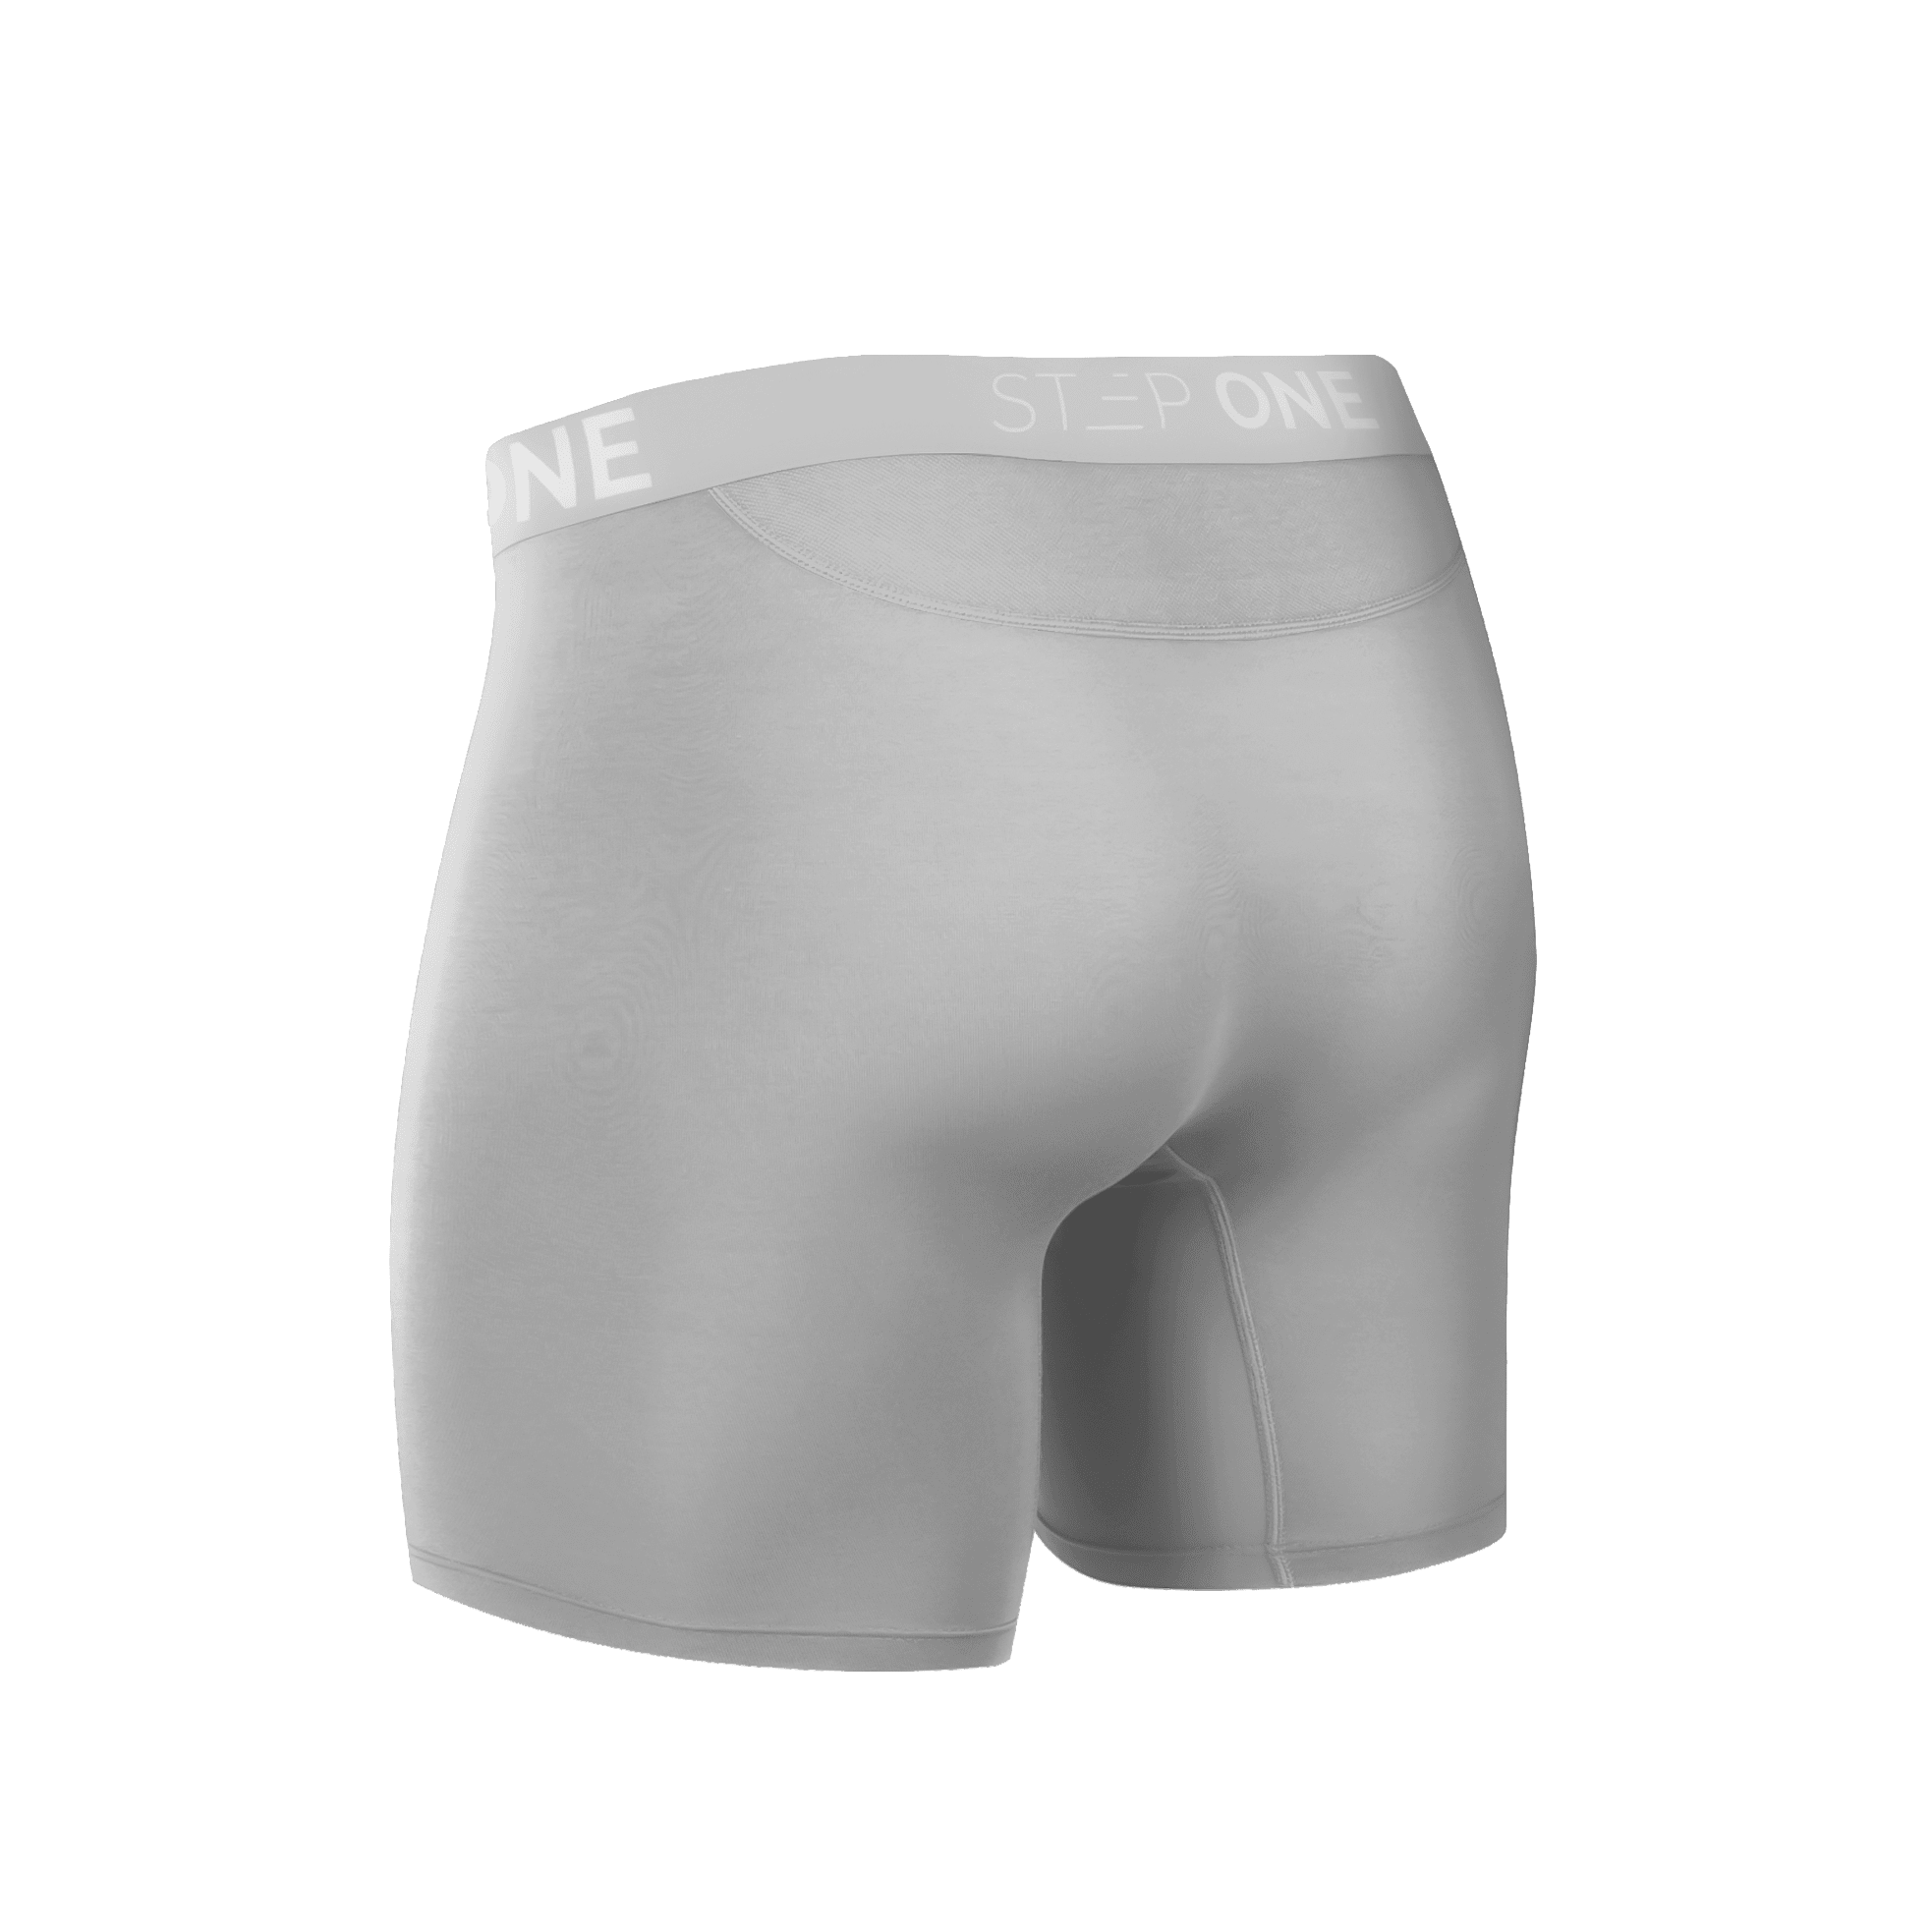 Boxer Brief Fly - Tin Cans - View 2